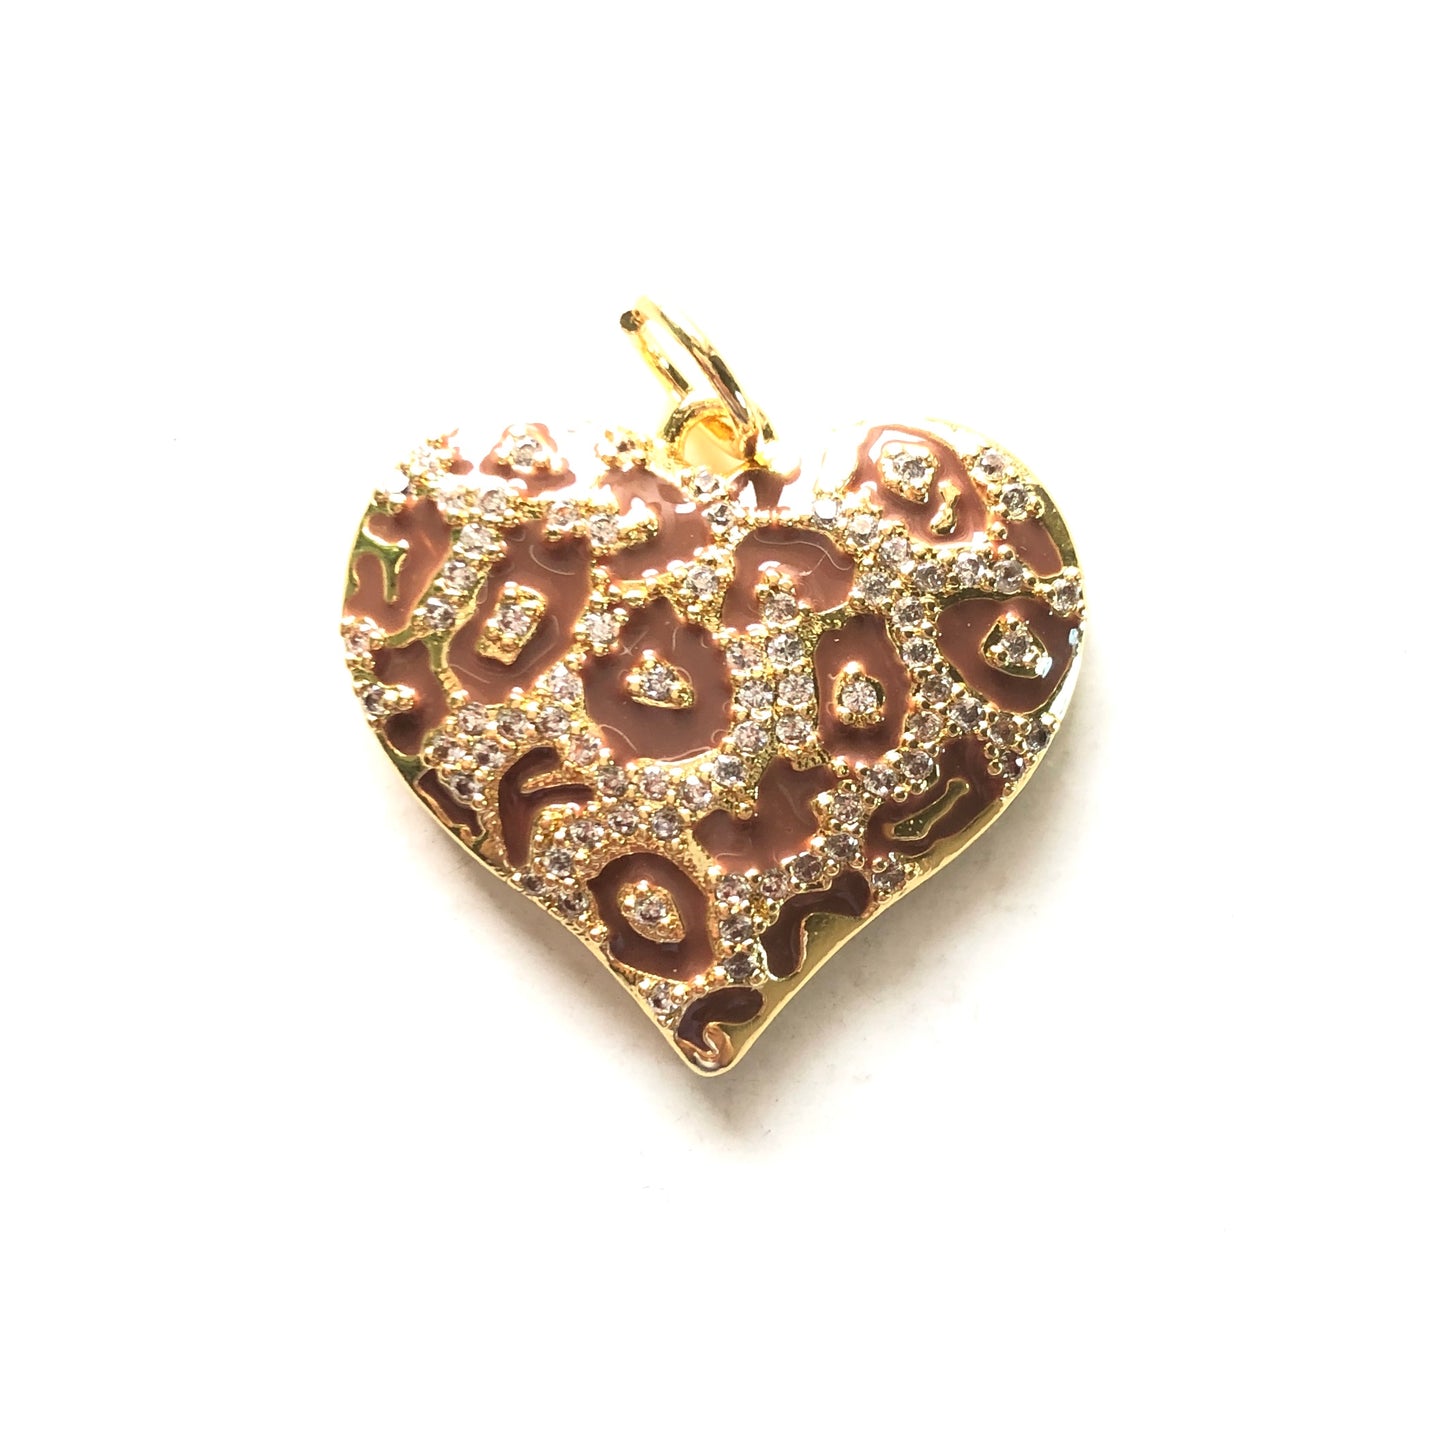 10/lot 24.5*22mm CZ Paved Brown Leopard Print Heart Charm Pendants Gold CZ Paved Charms Hearts Leopard Printed New Charms Arrivals Charms Beads Beyond